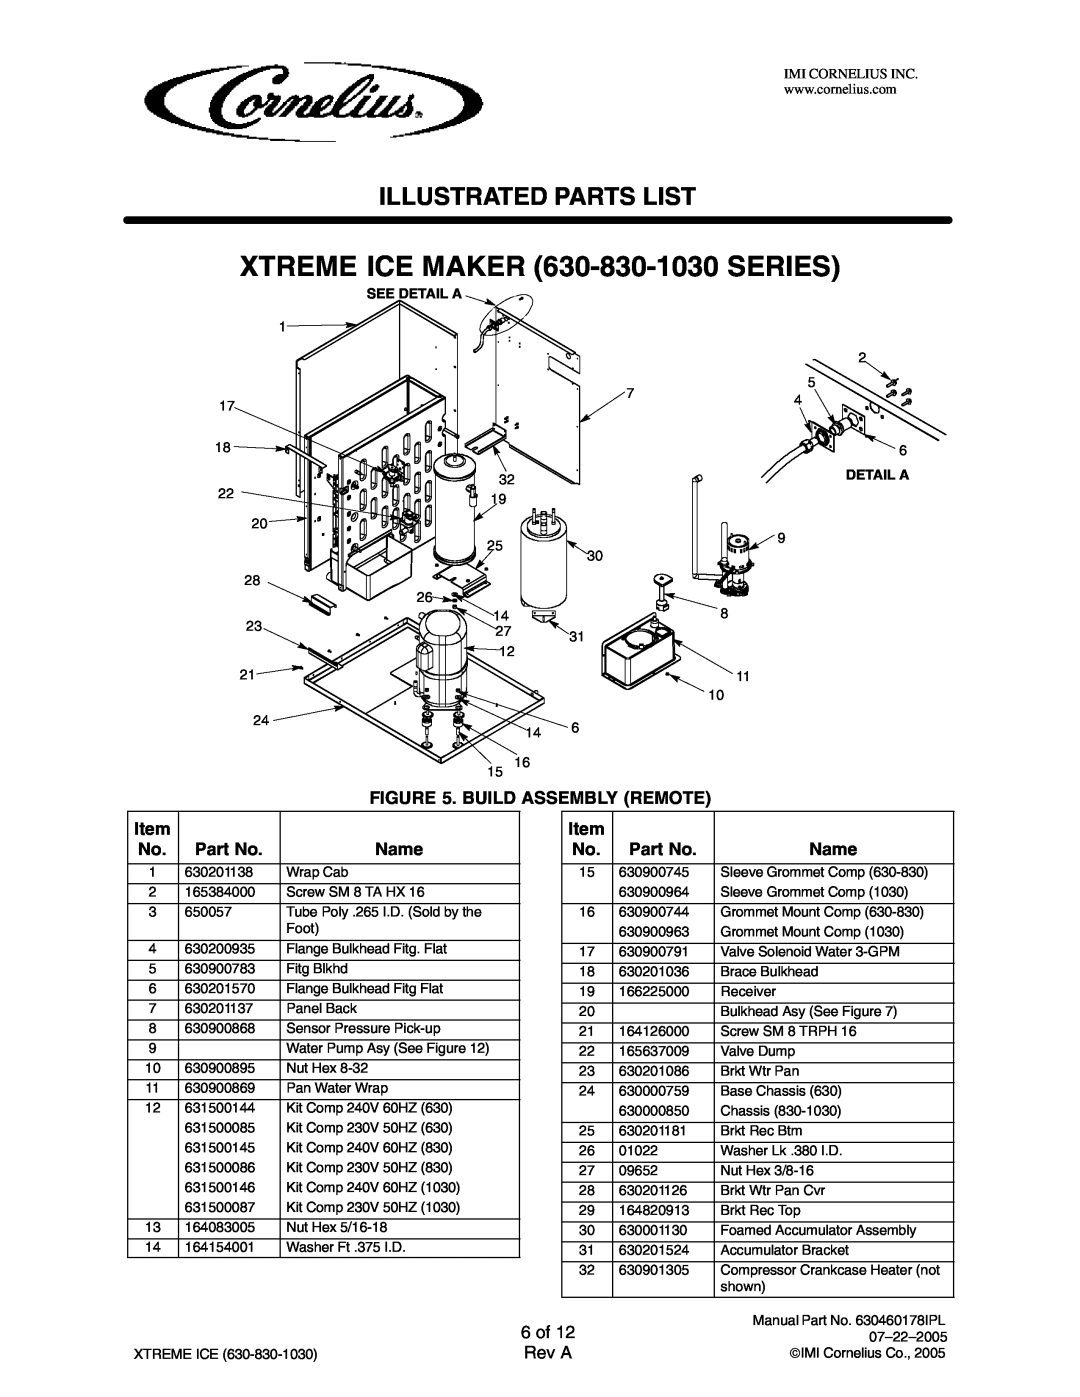 Cornelius 631806002, 631810003 manual 6 of, XTREME ICE MAKER 630-830-1030SERIES, Illustrated Parts List, Rev A, See Detail A 